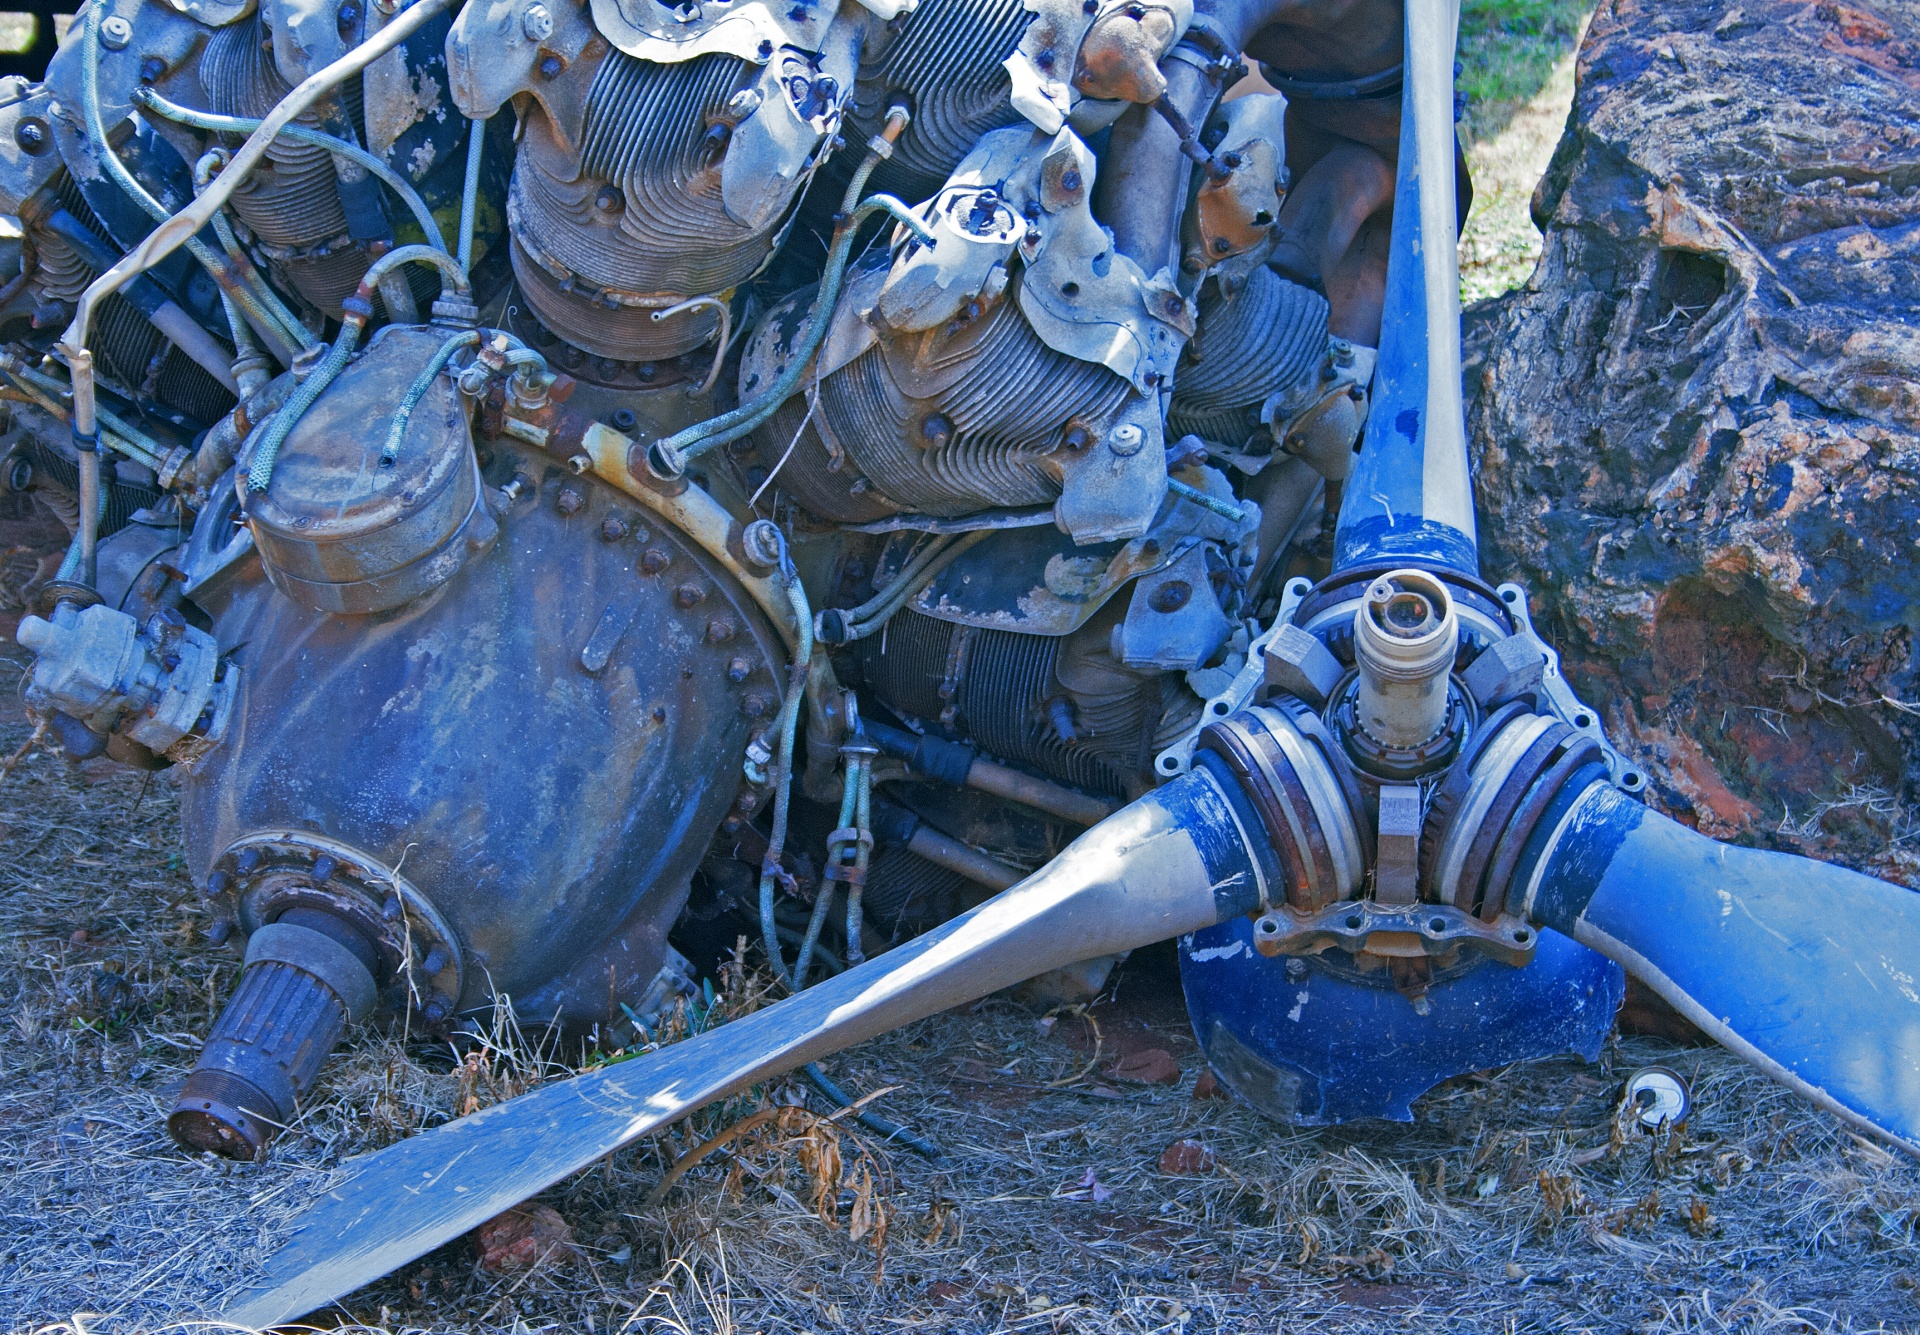 propeller of a staged crashed aircraft lying next to the engine